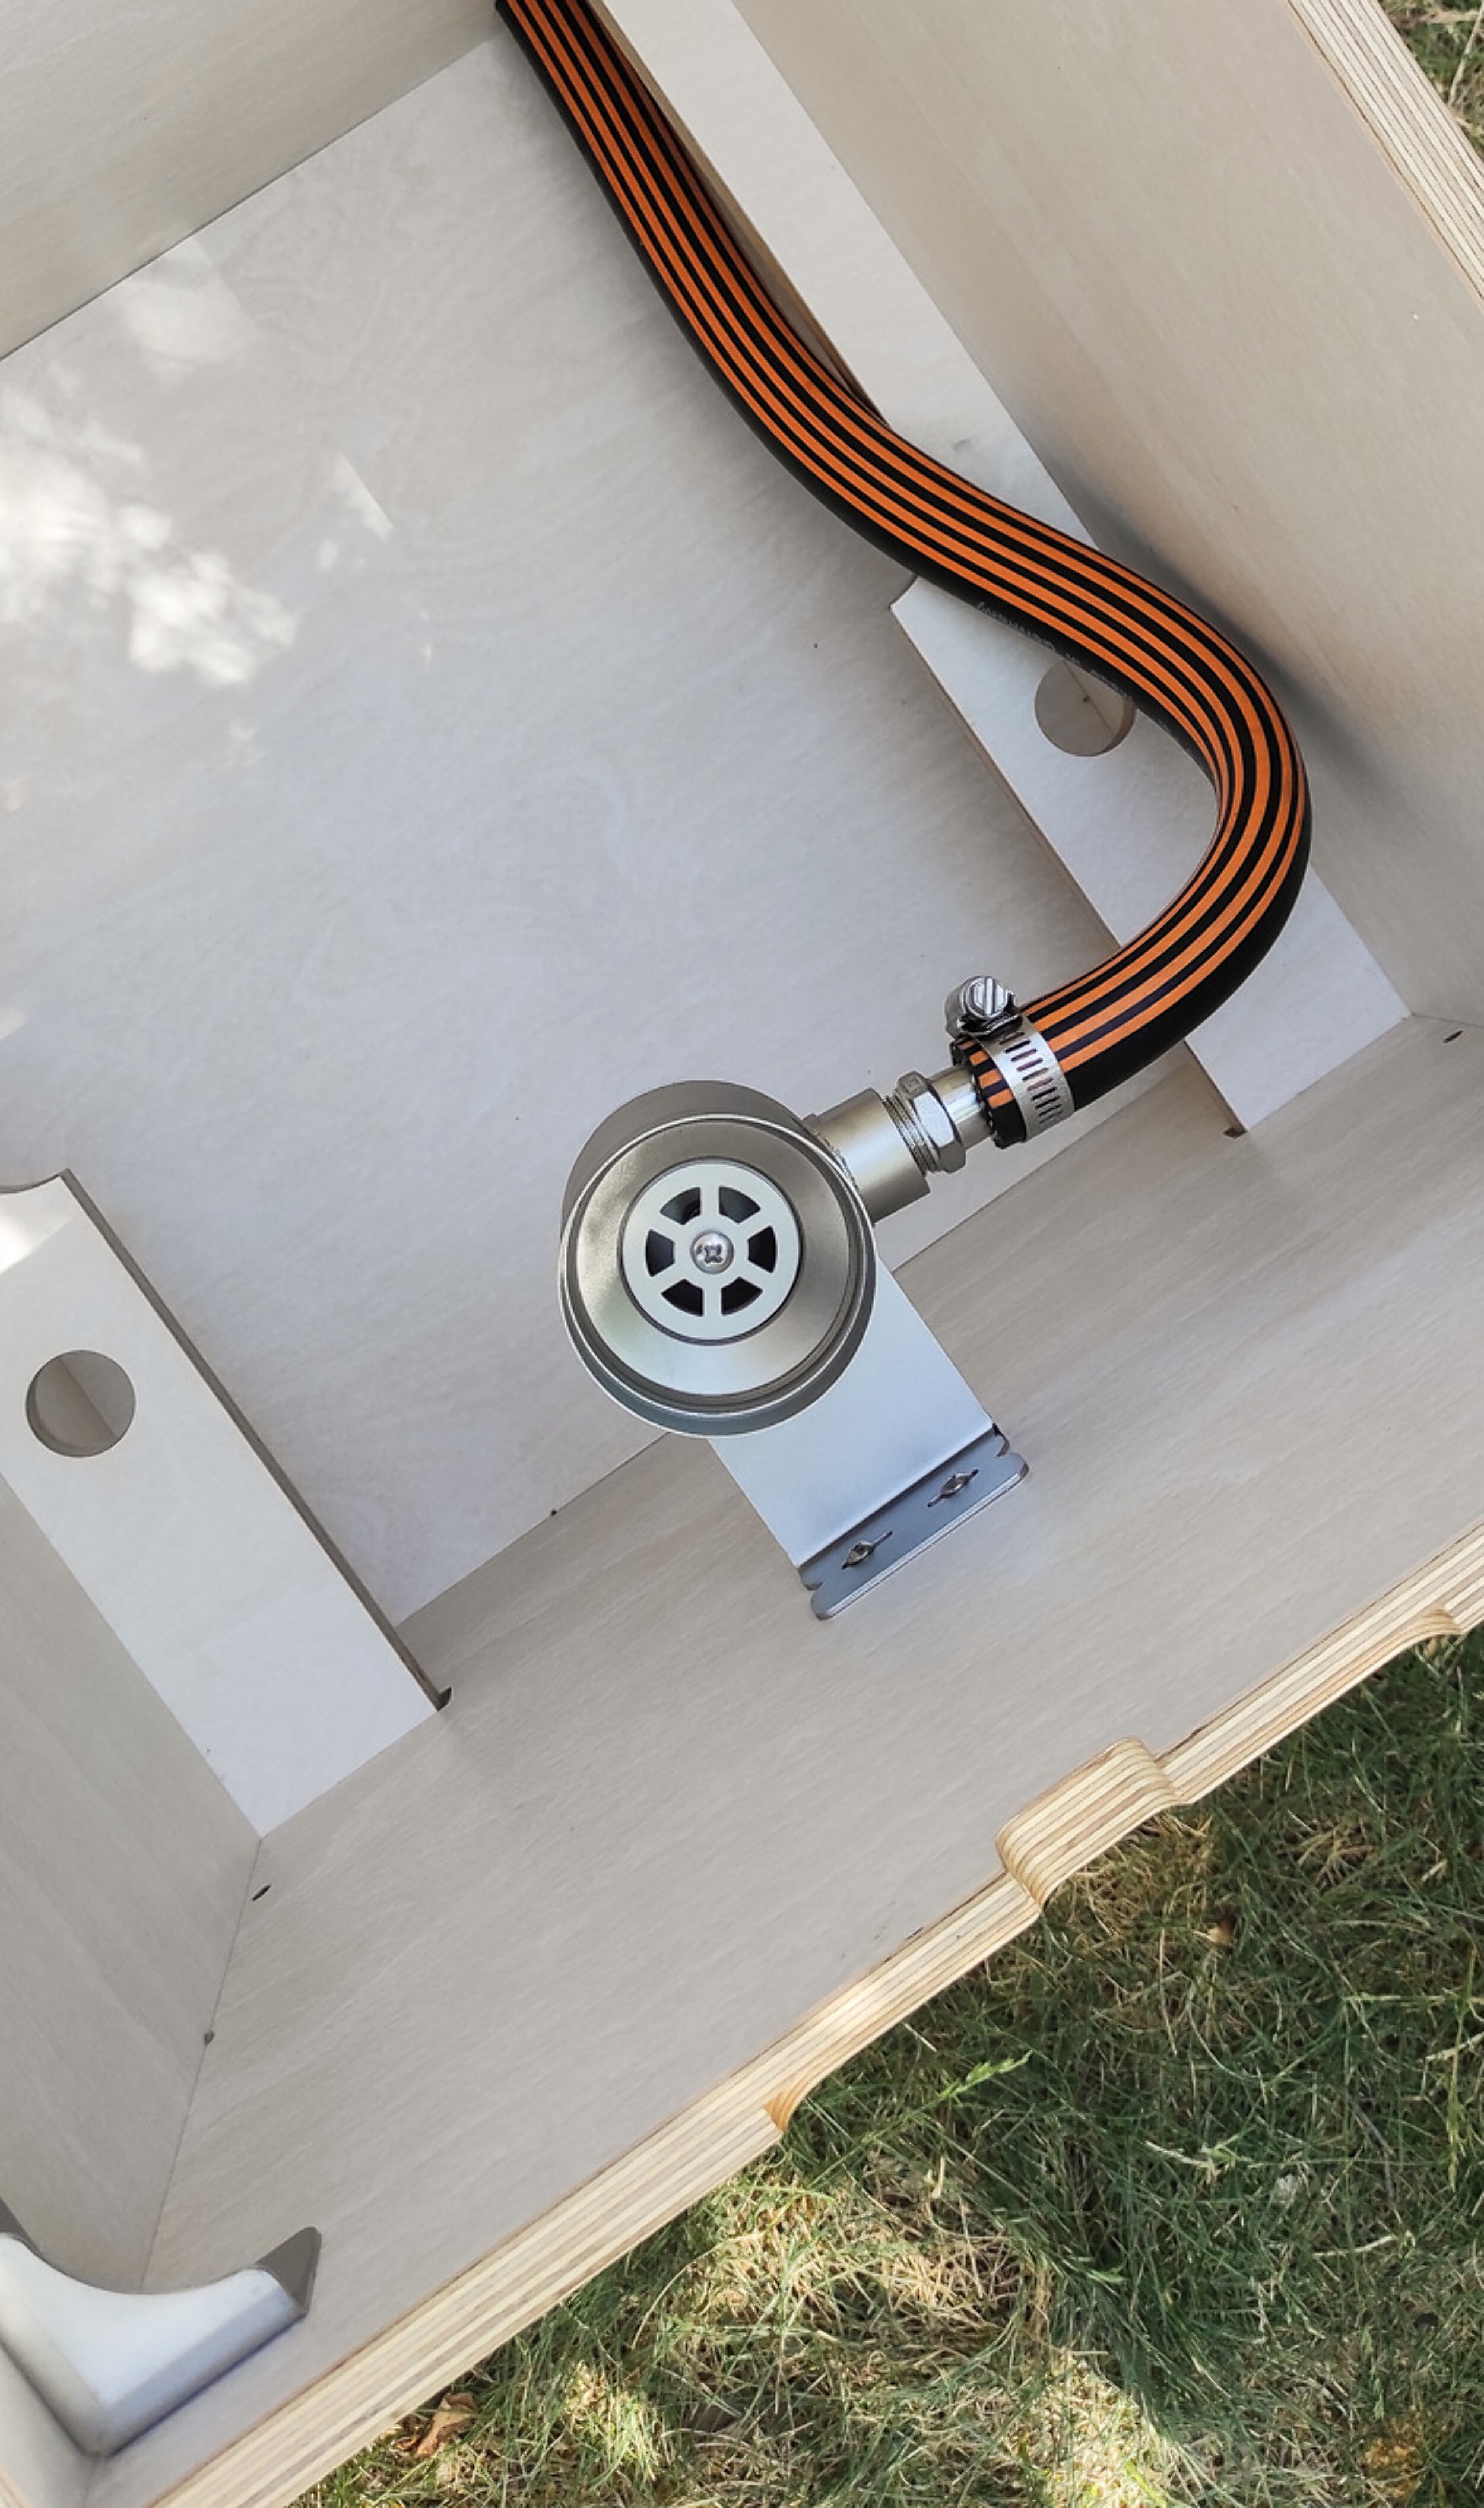 You can connect any hose and pipe system with a ½ inch flange to our stainless steel siphon